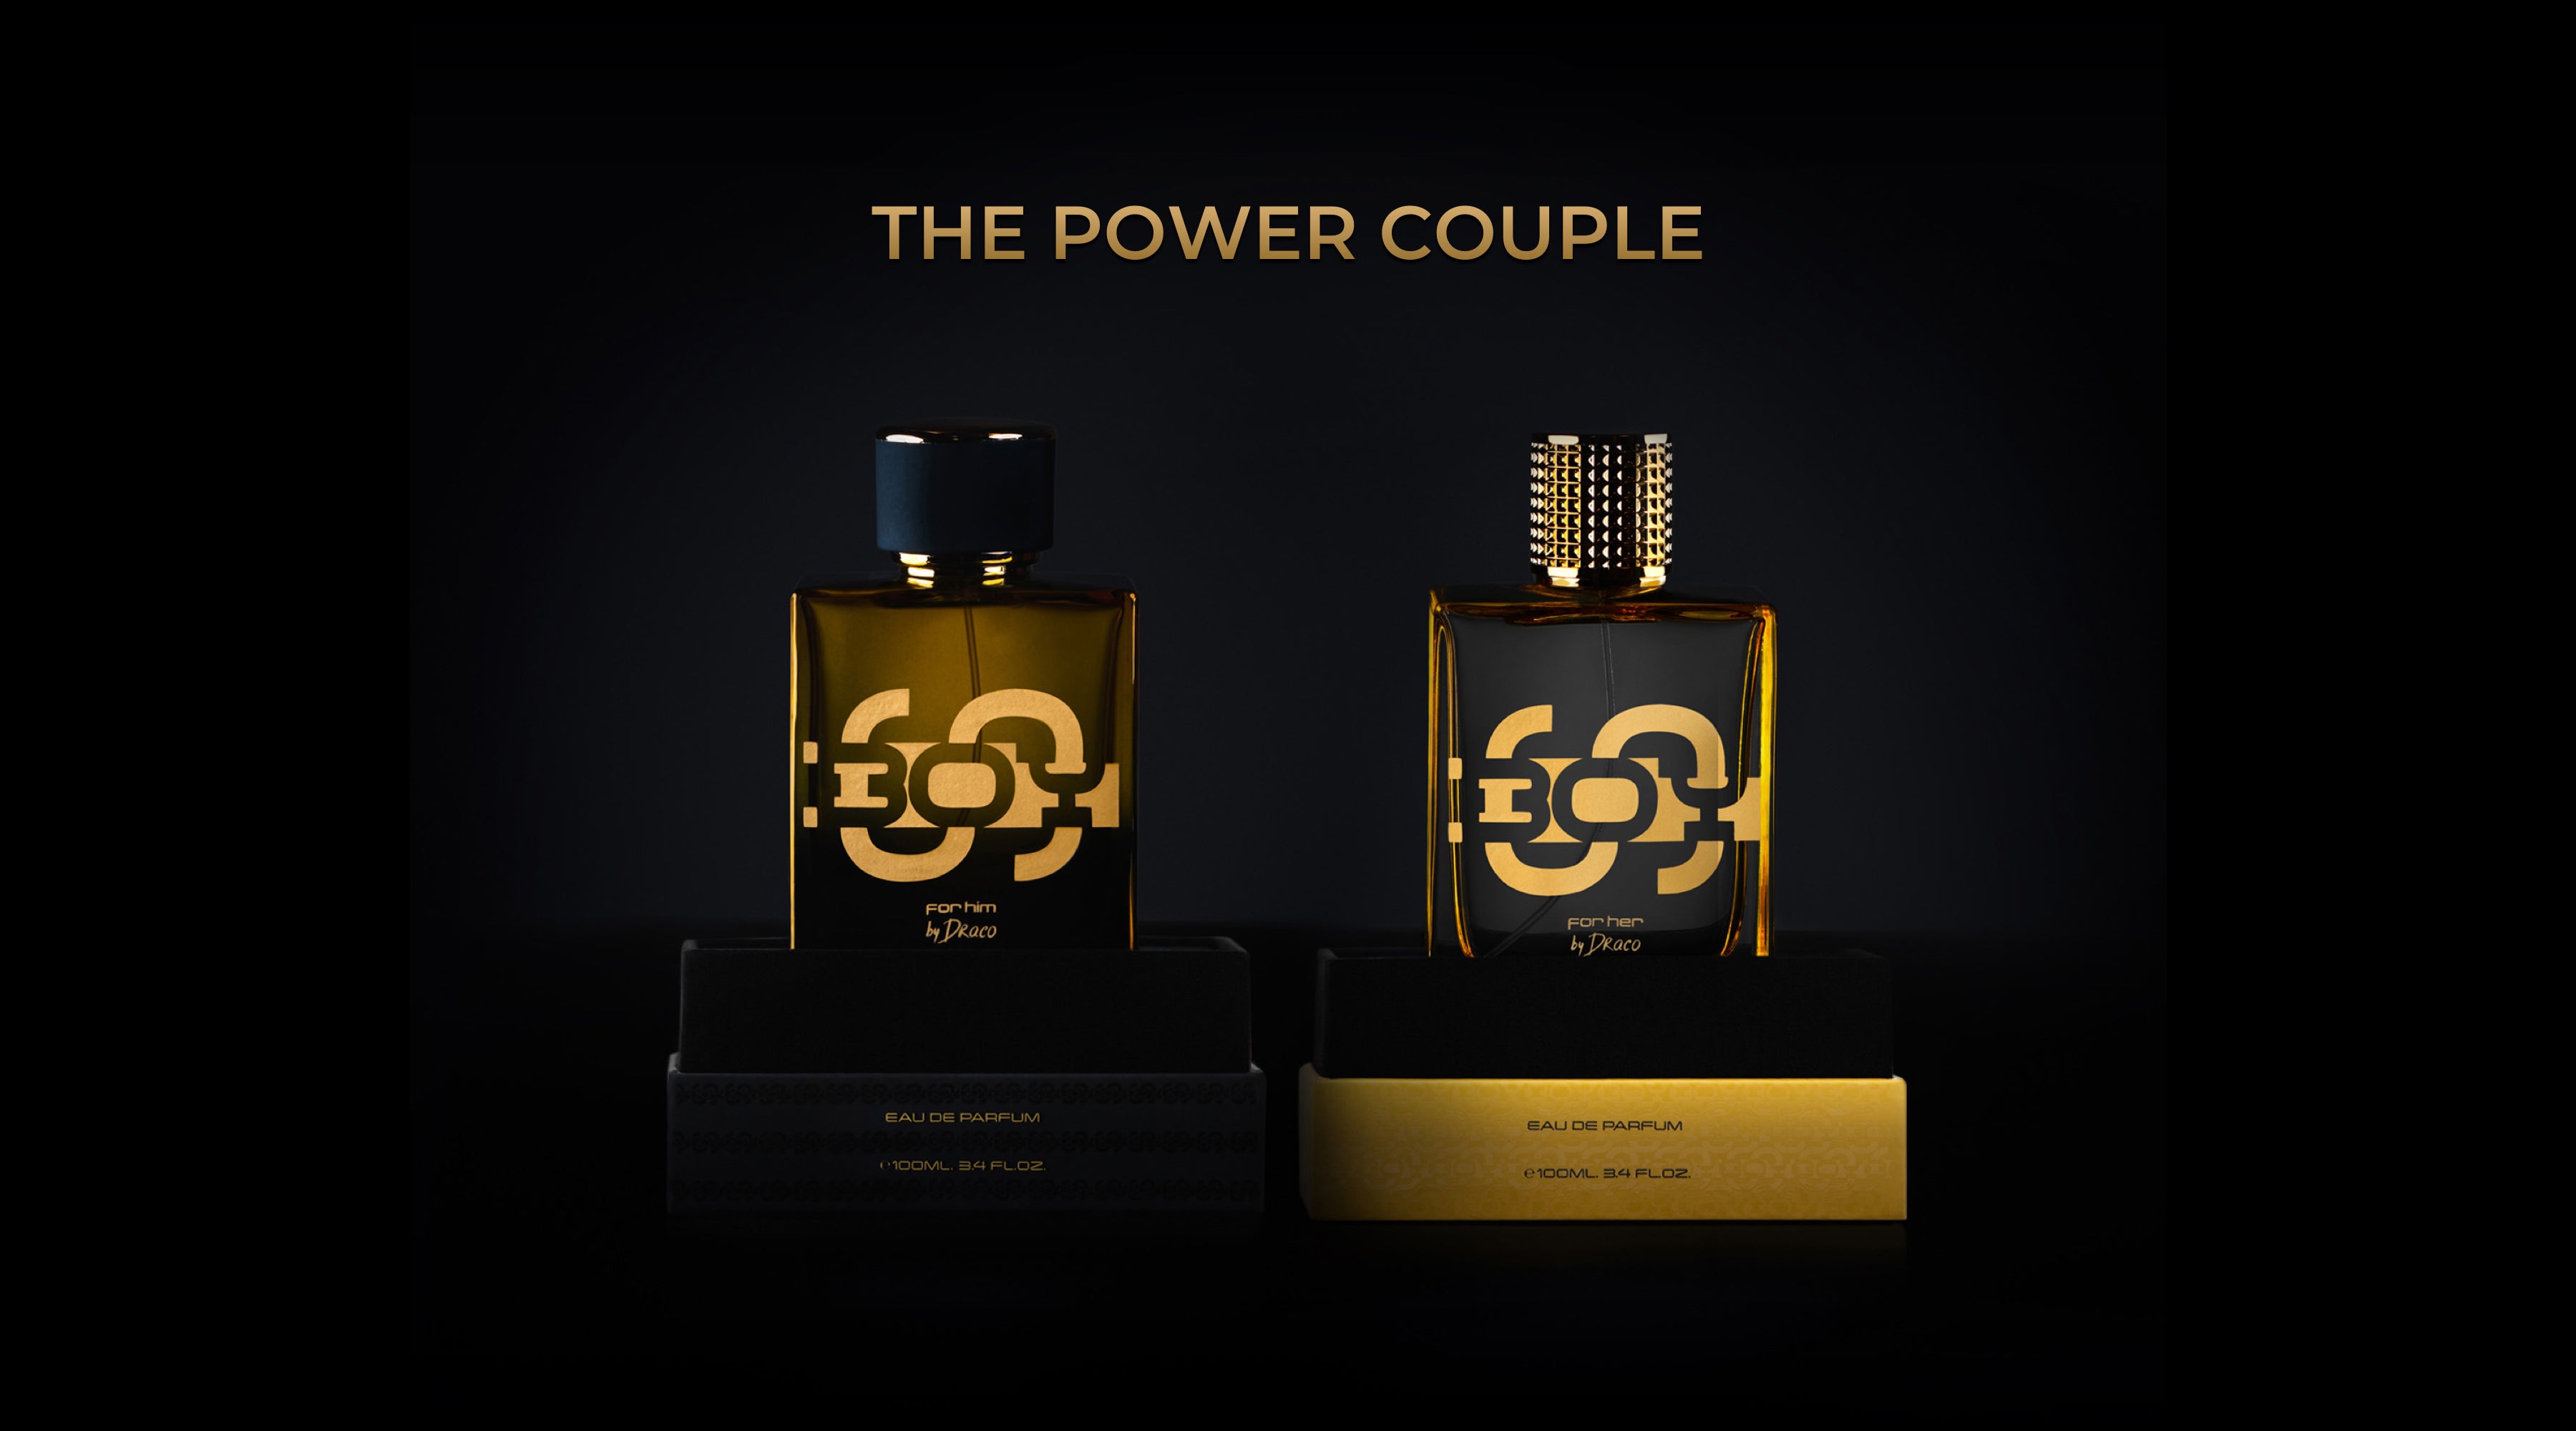 SBOY By Draco perfume bundle the power couple fragrances for men and for women